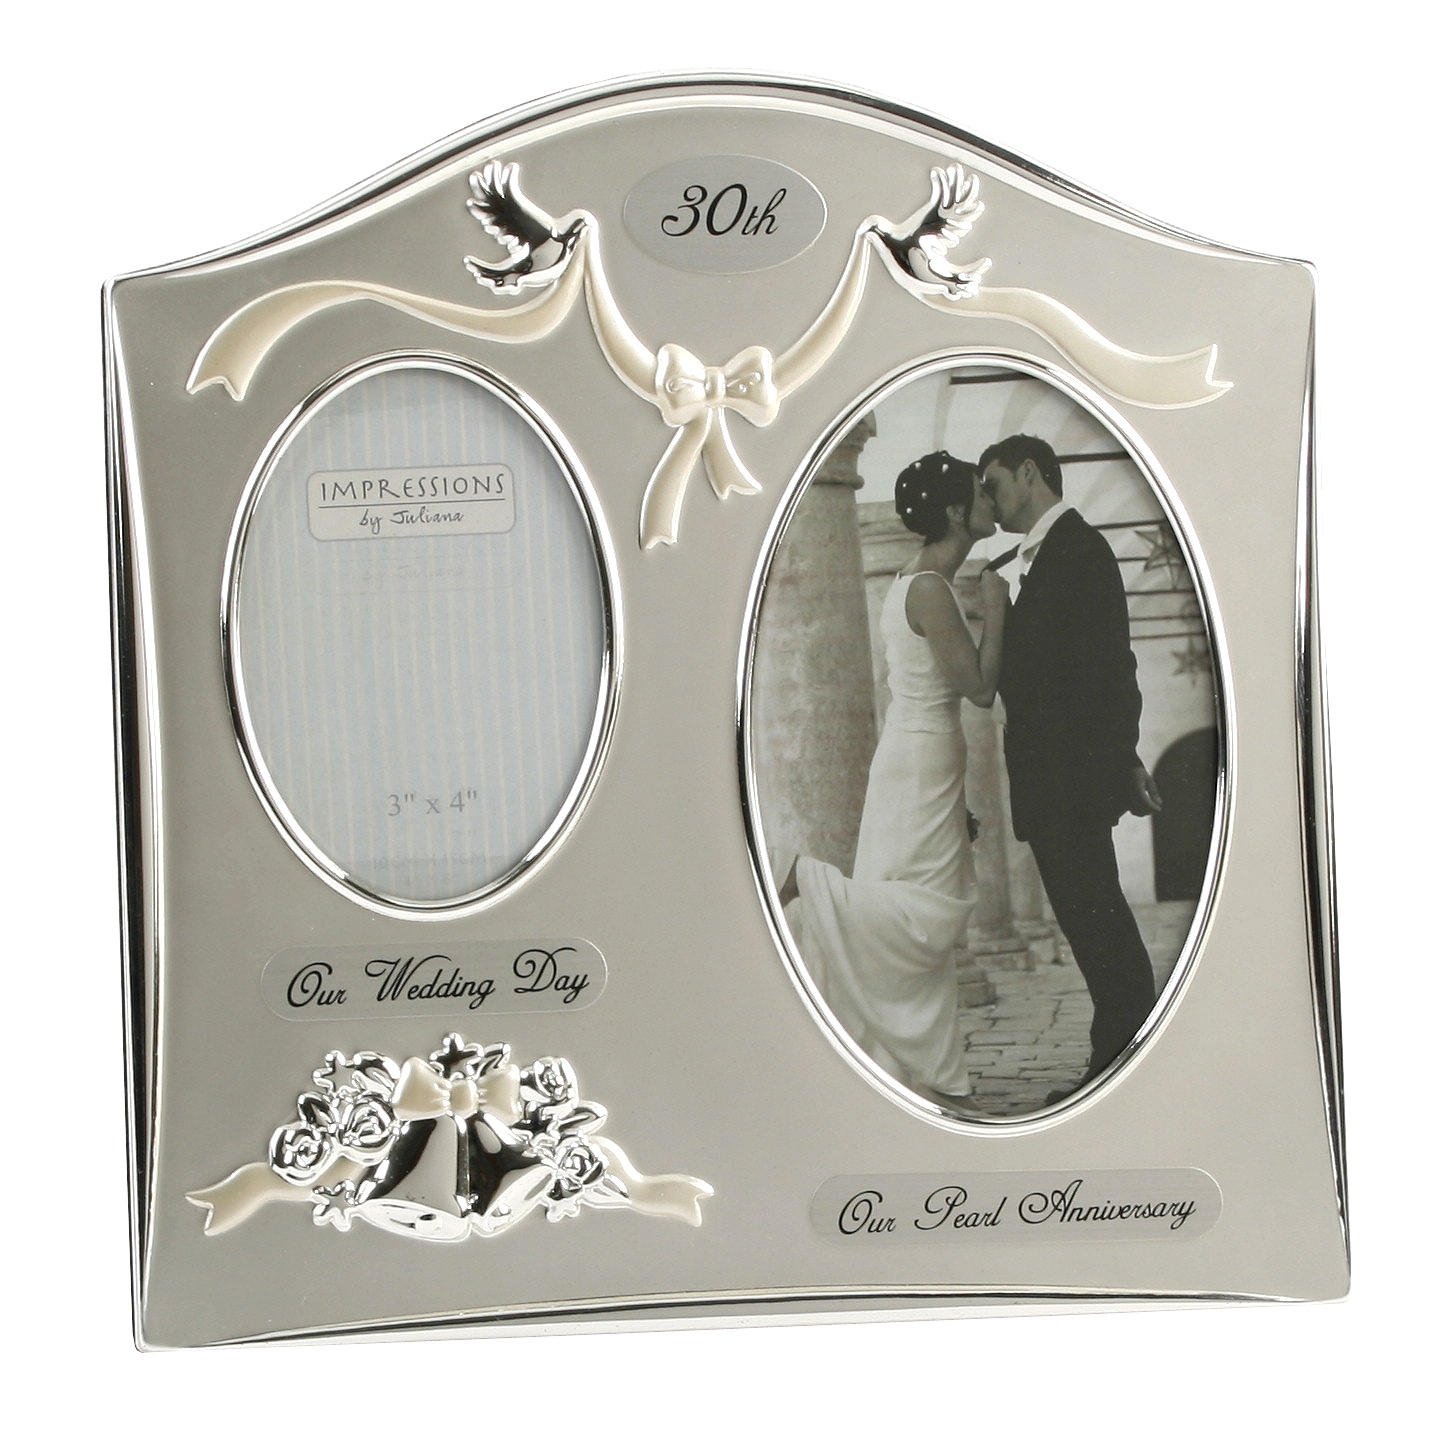 10 Lovely 30Th Anniversary Gift Ideas For Husband 30th anniversary wedding gifts special gifts4u 2022